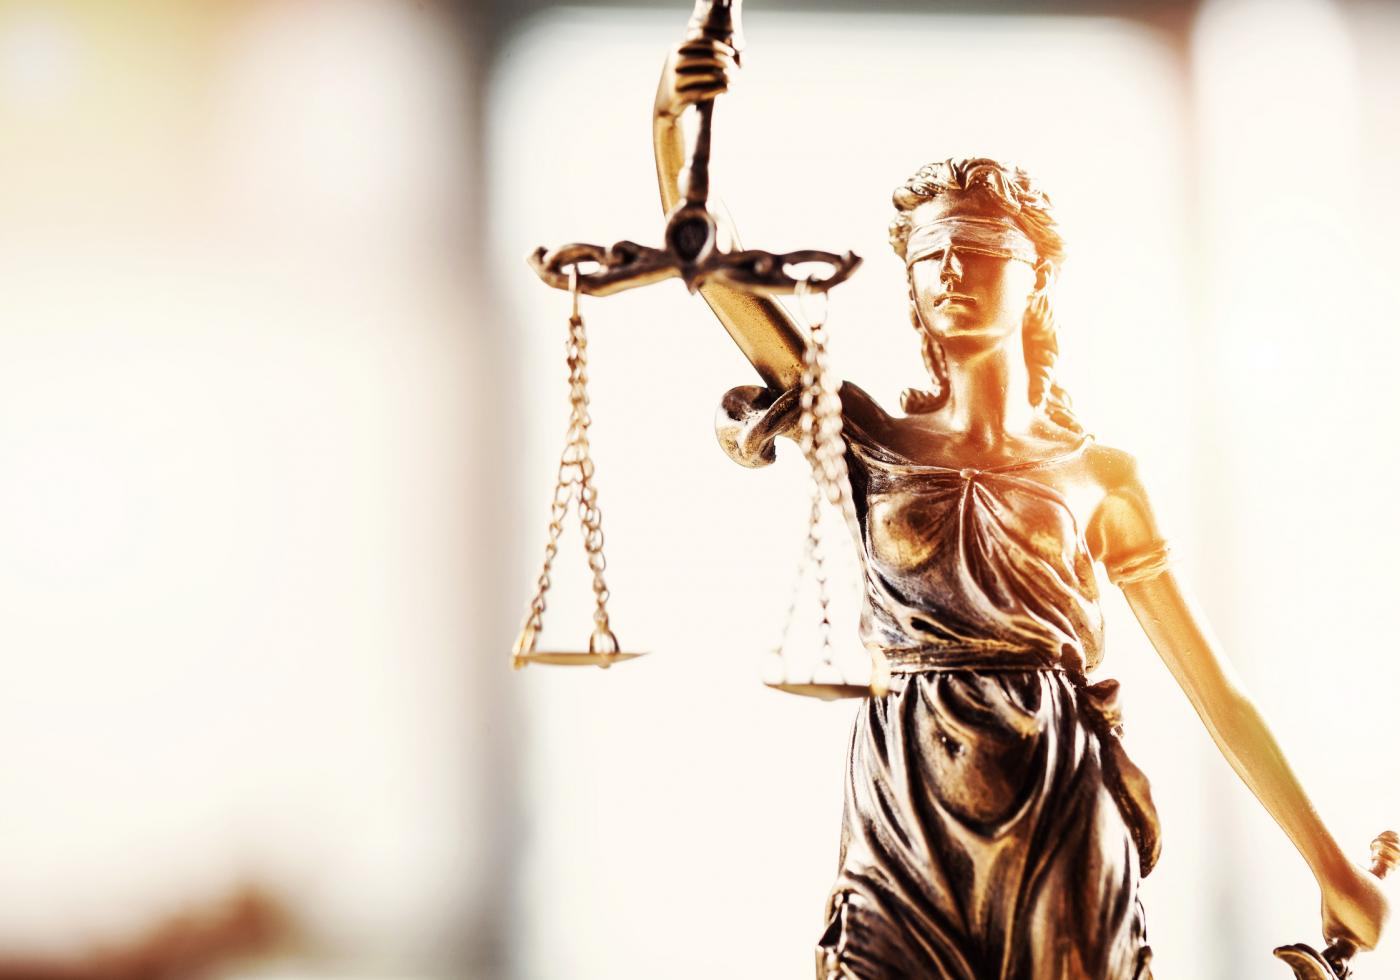 Values and ethics: Lady Justice with scales